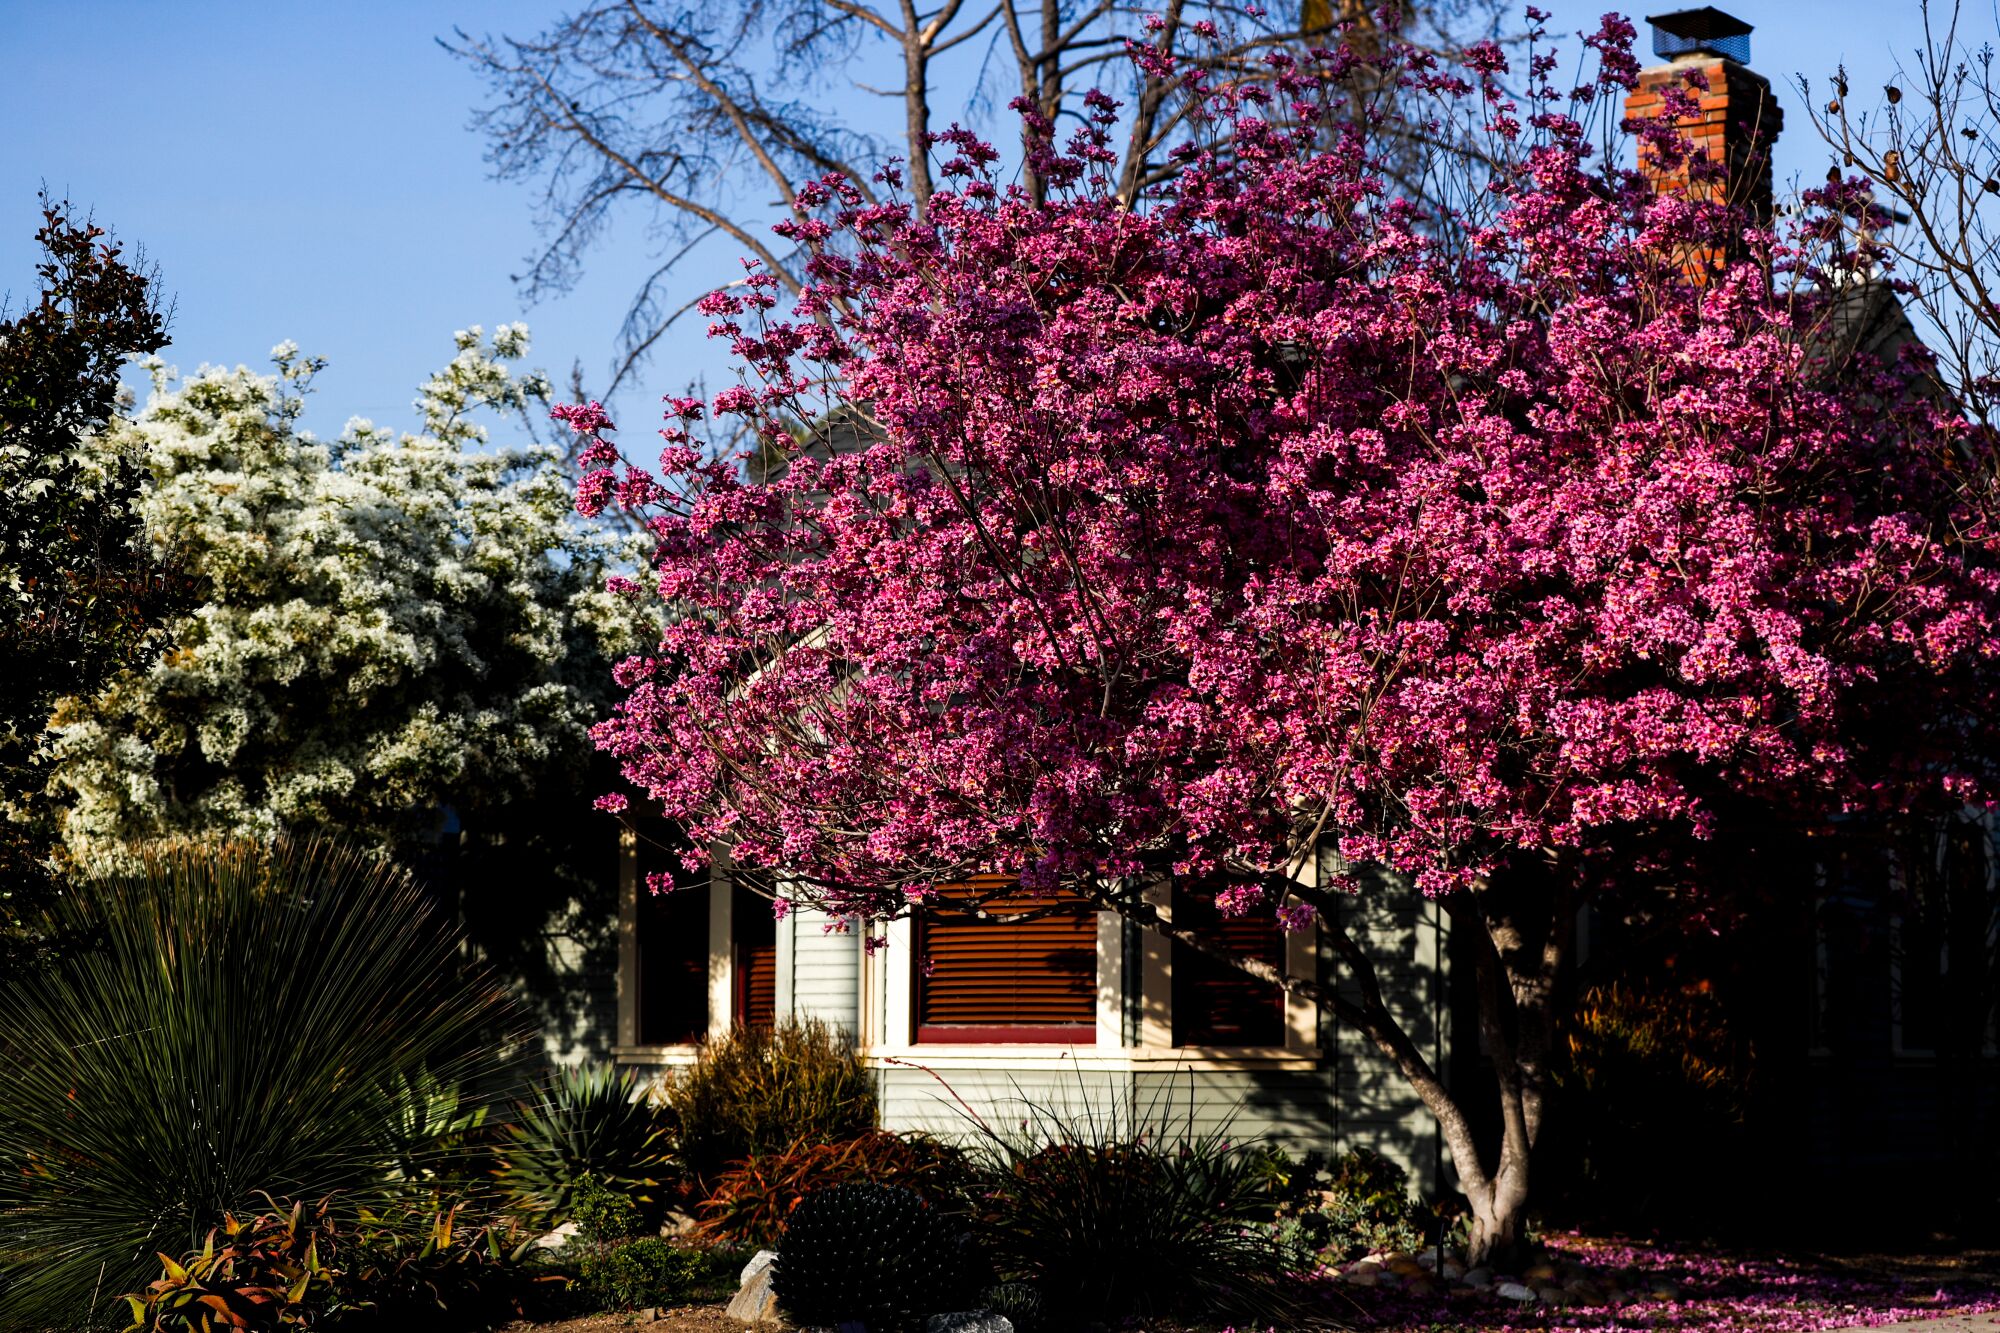  A blooming pink trumpet tree brings a splash of color to a front yard in the Kensington neighborhood